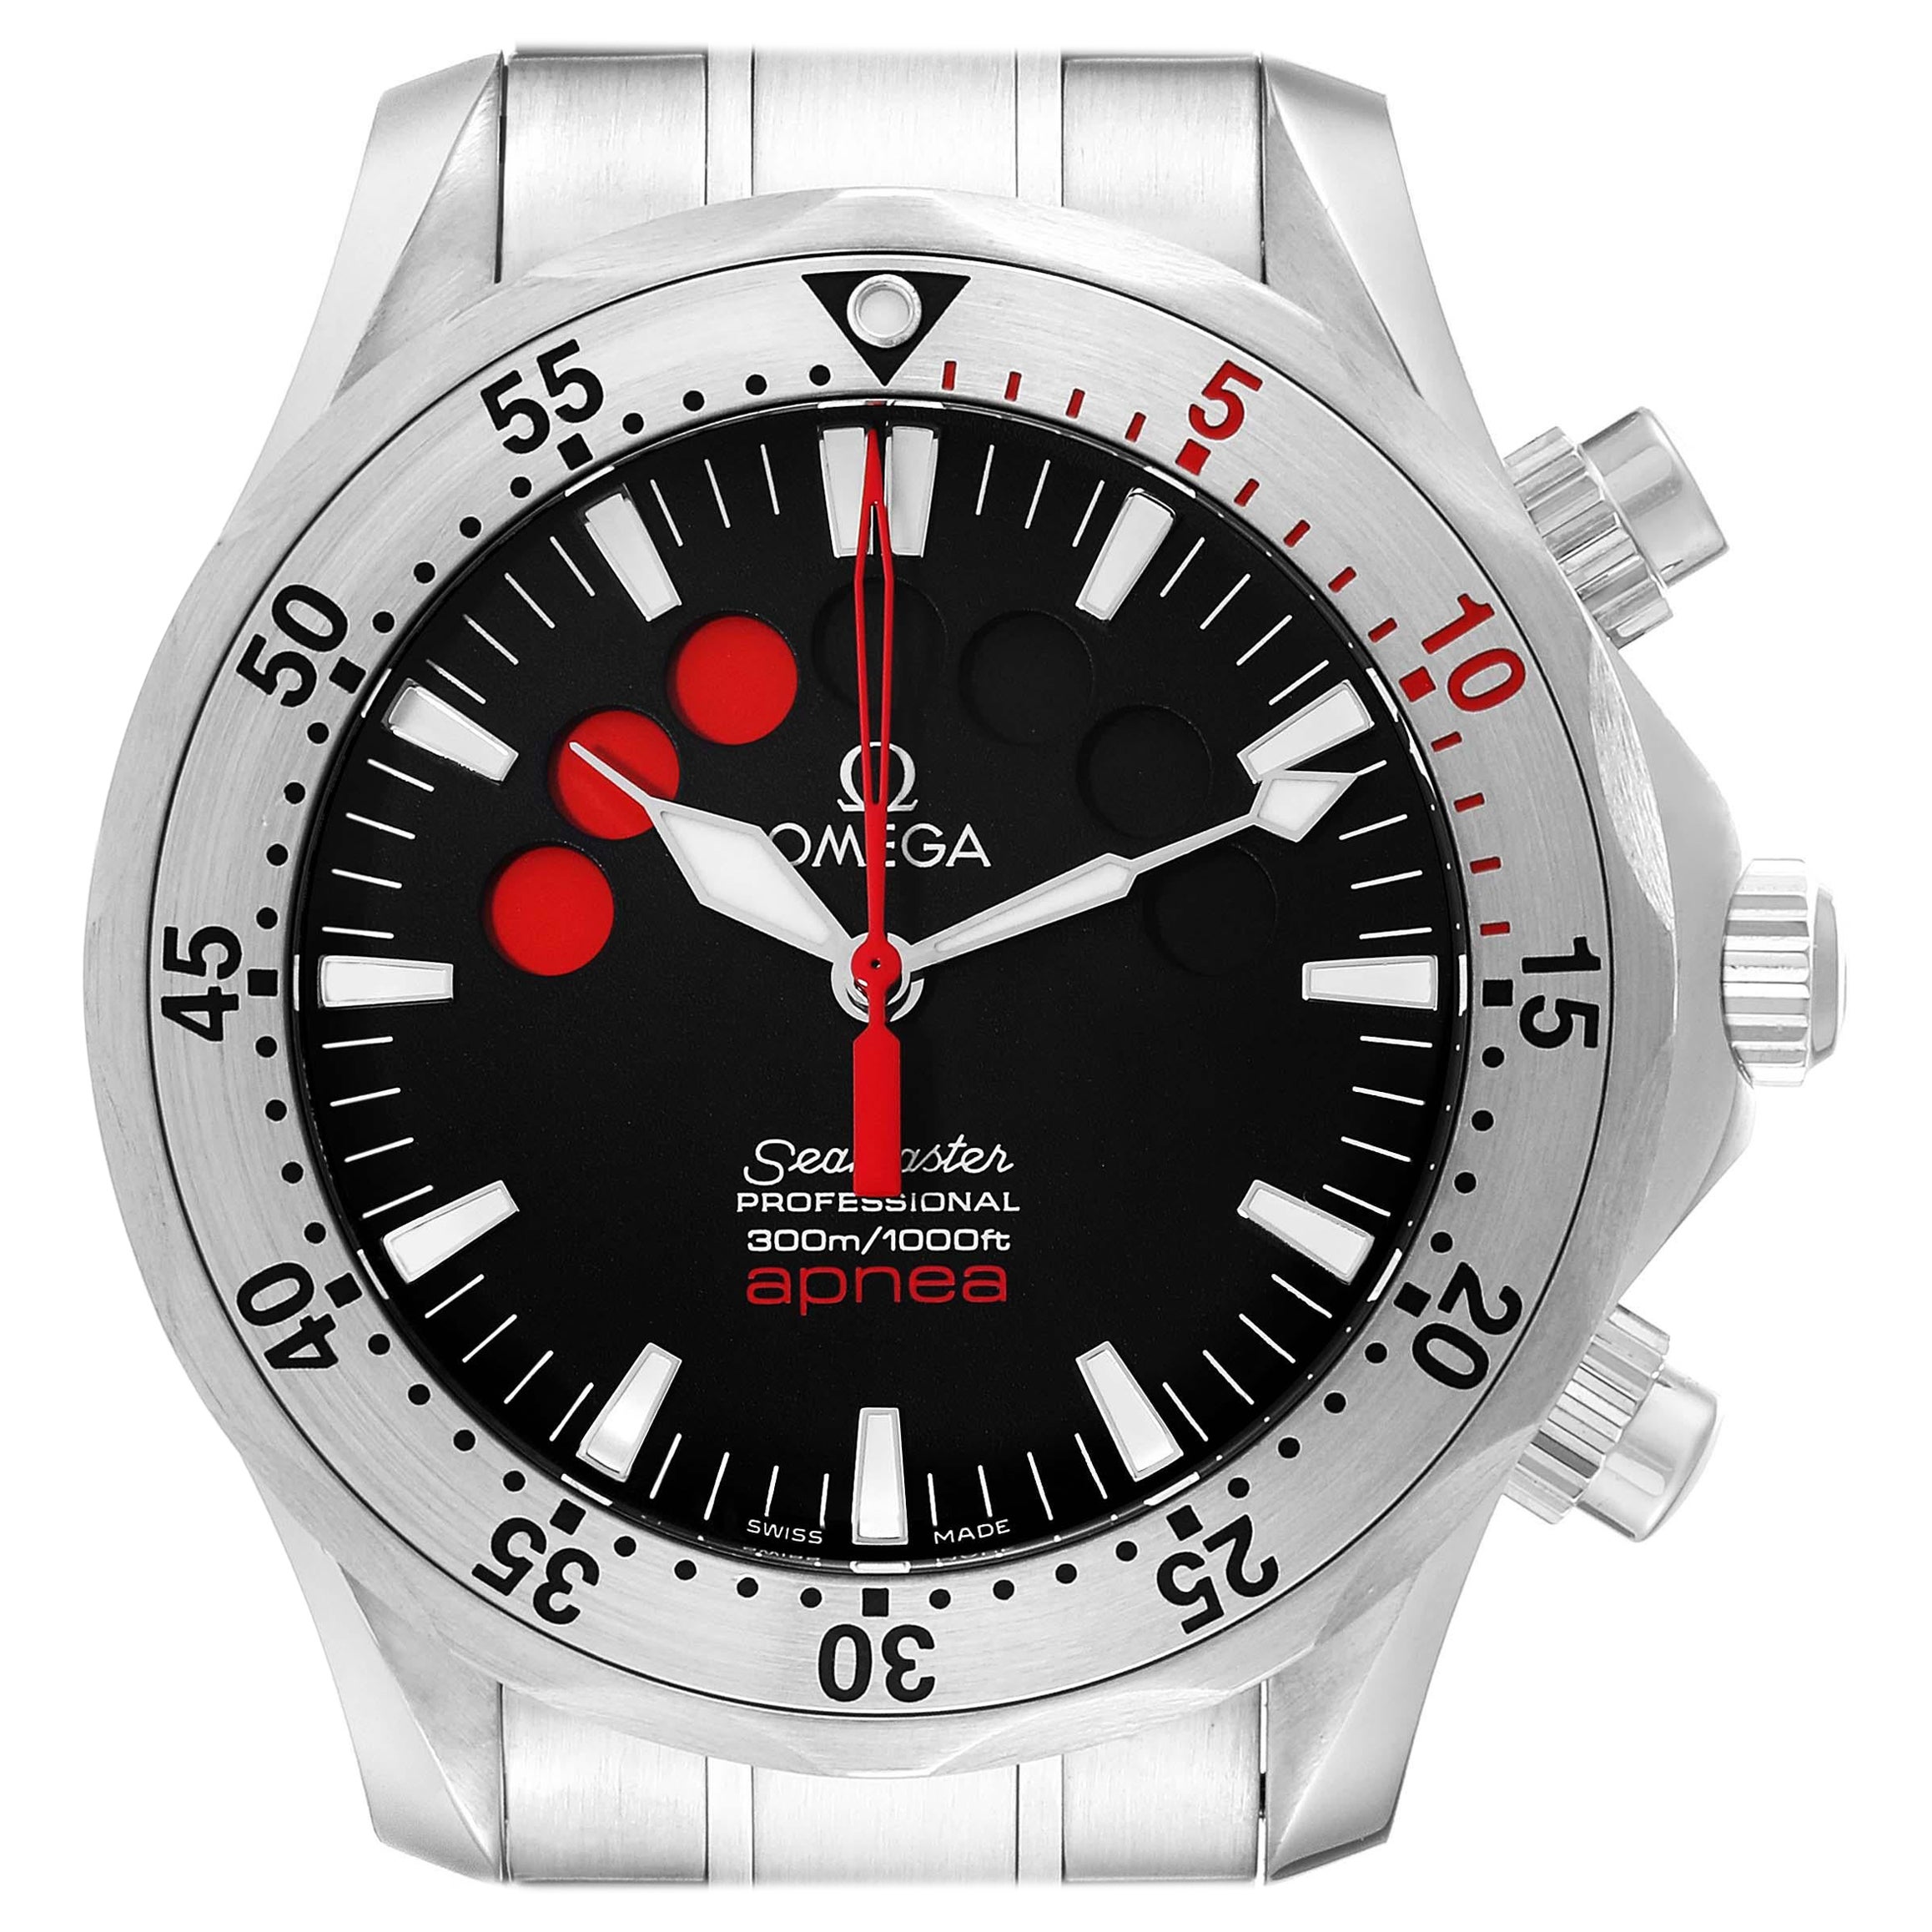 Omega Seamaster Apnea Jacques Mayol Black Dial Steel Mens Watch 2595.50.00 For Sale